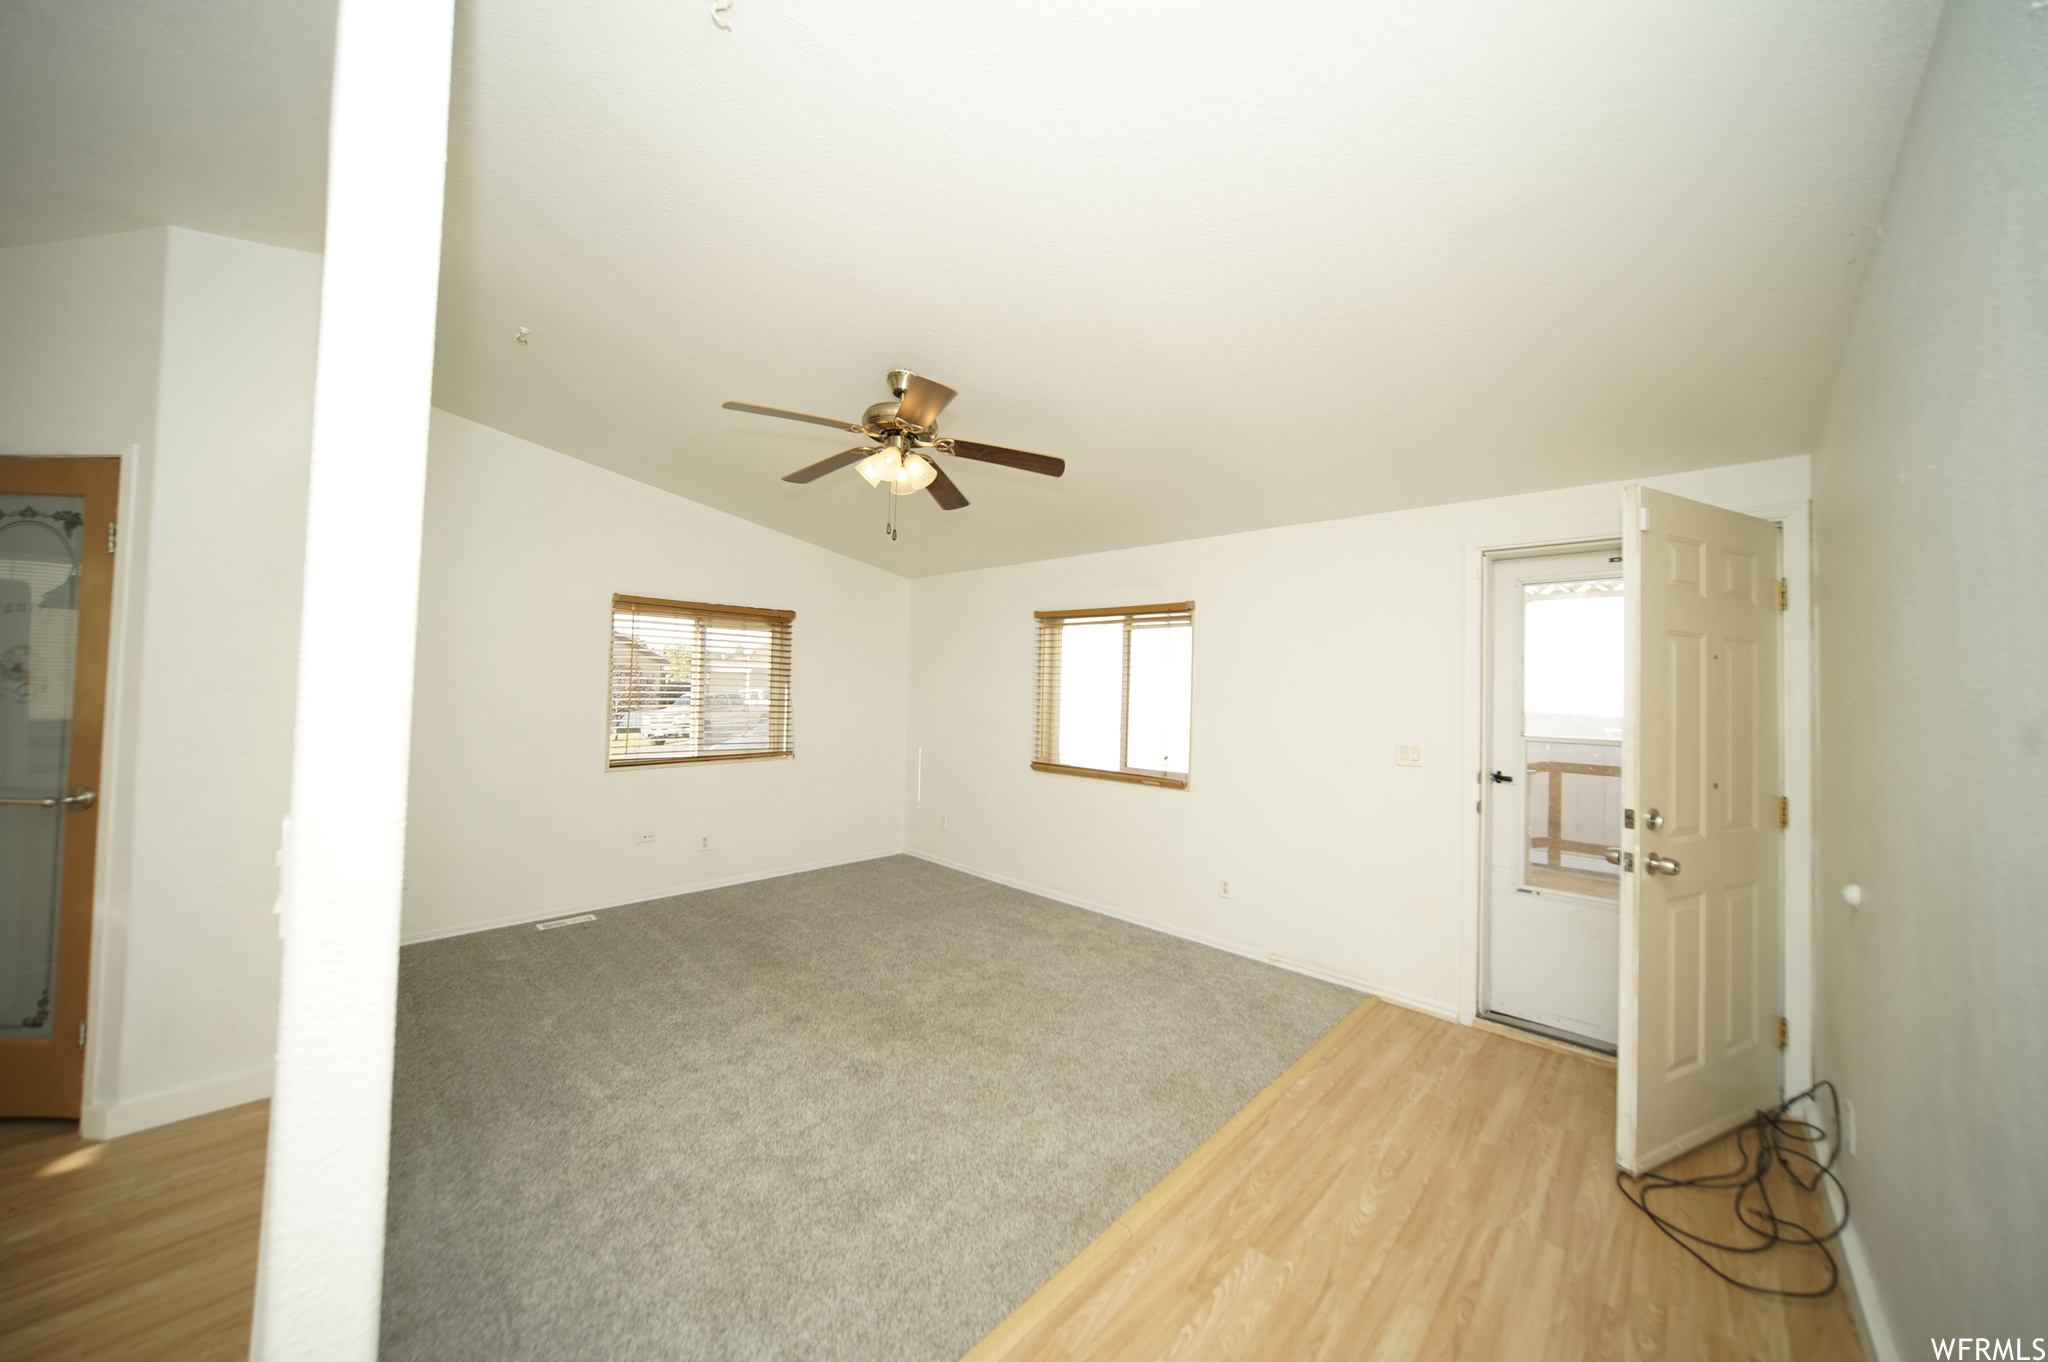 Unfurnished room with vaulted ceiling, ceiling fan, and light colored carpet